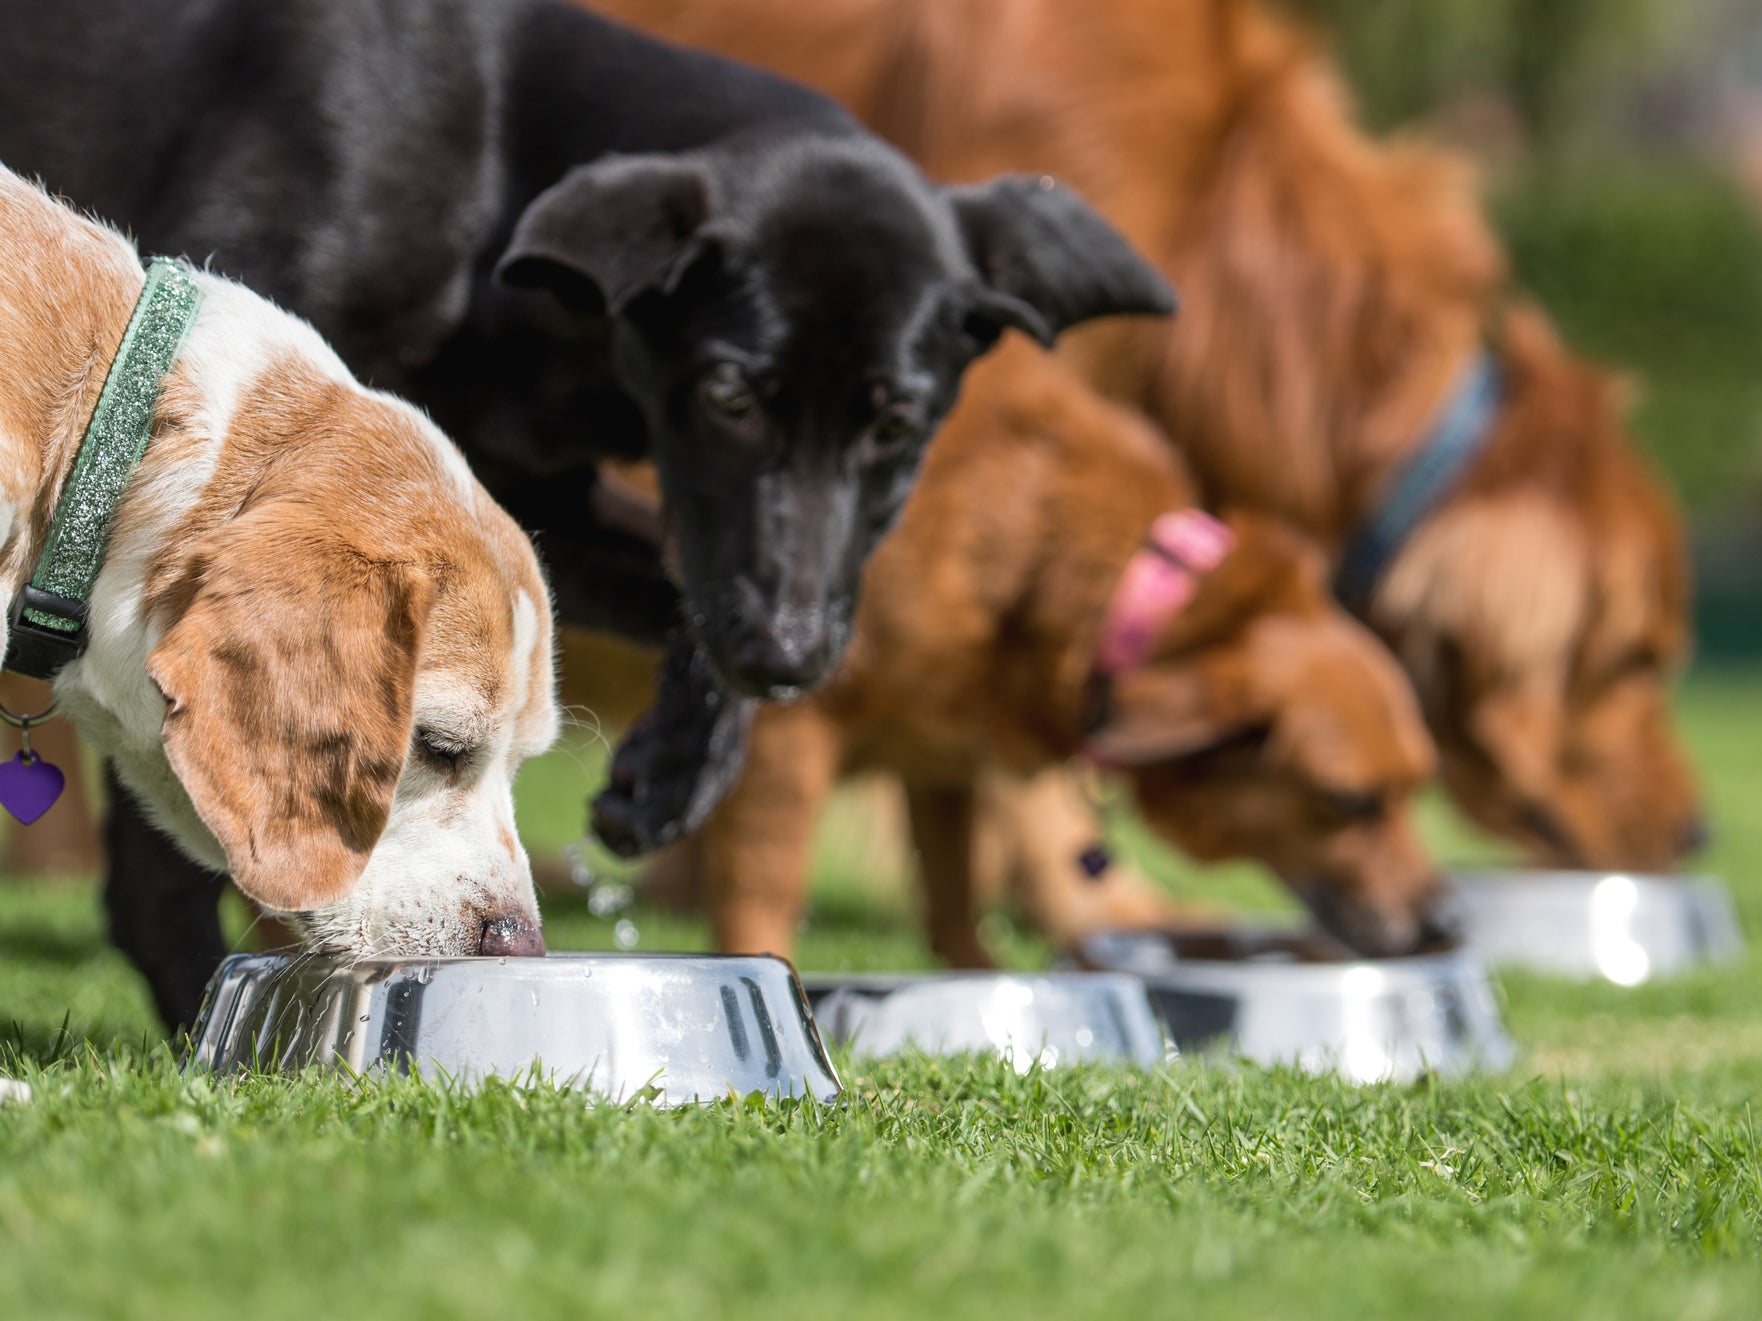 Good boys, bad bacteria. Scientists find raw dog food contains high levels of bacteria dangerous to humans and resistant to the most powerful antibiotics